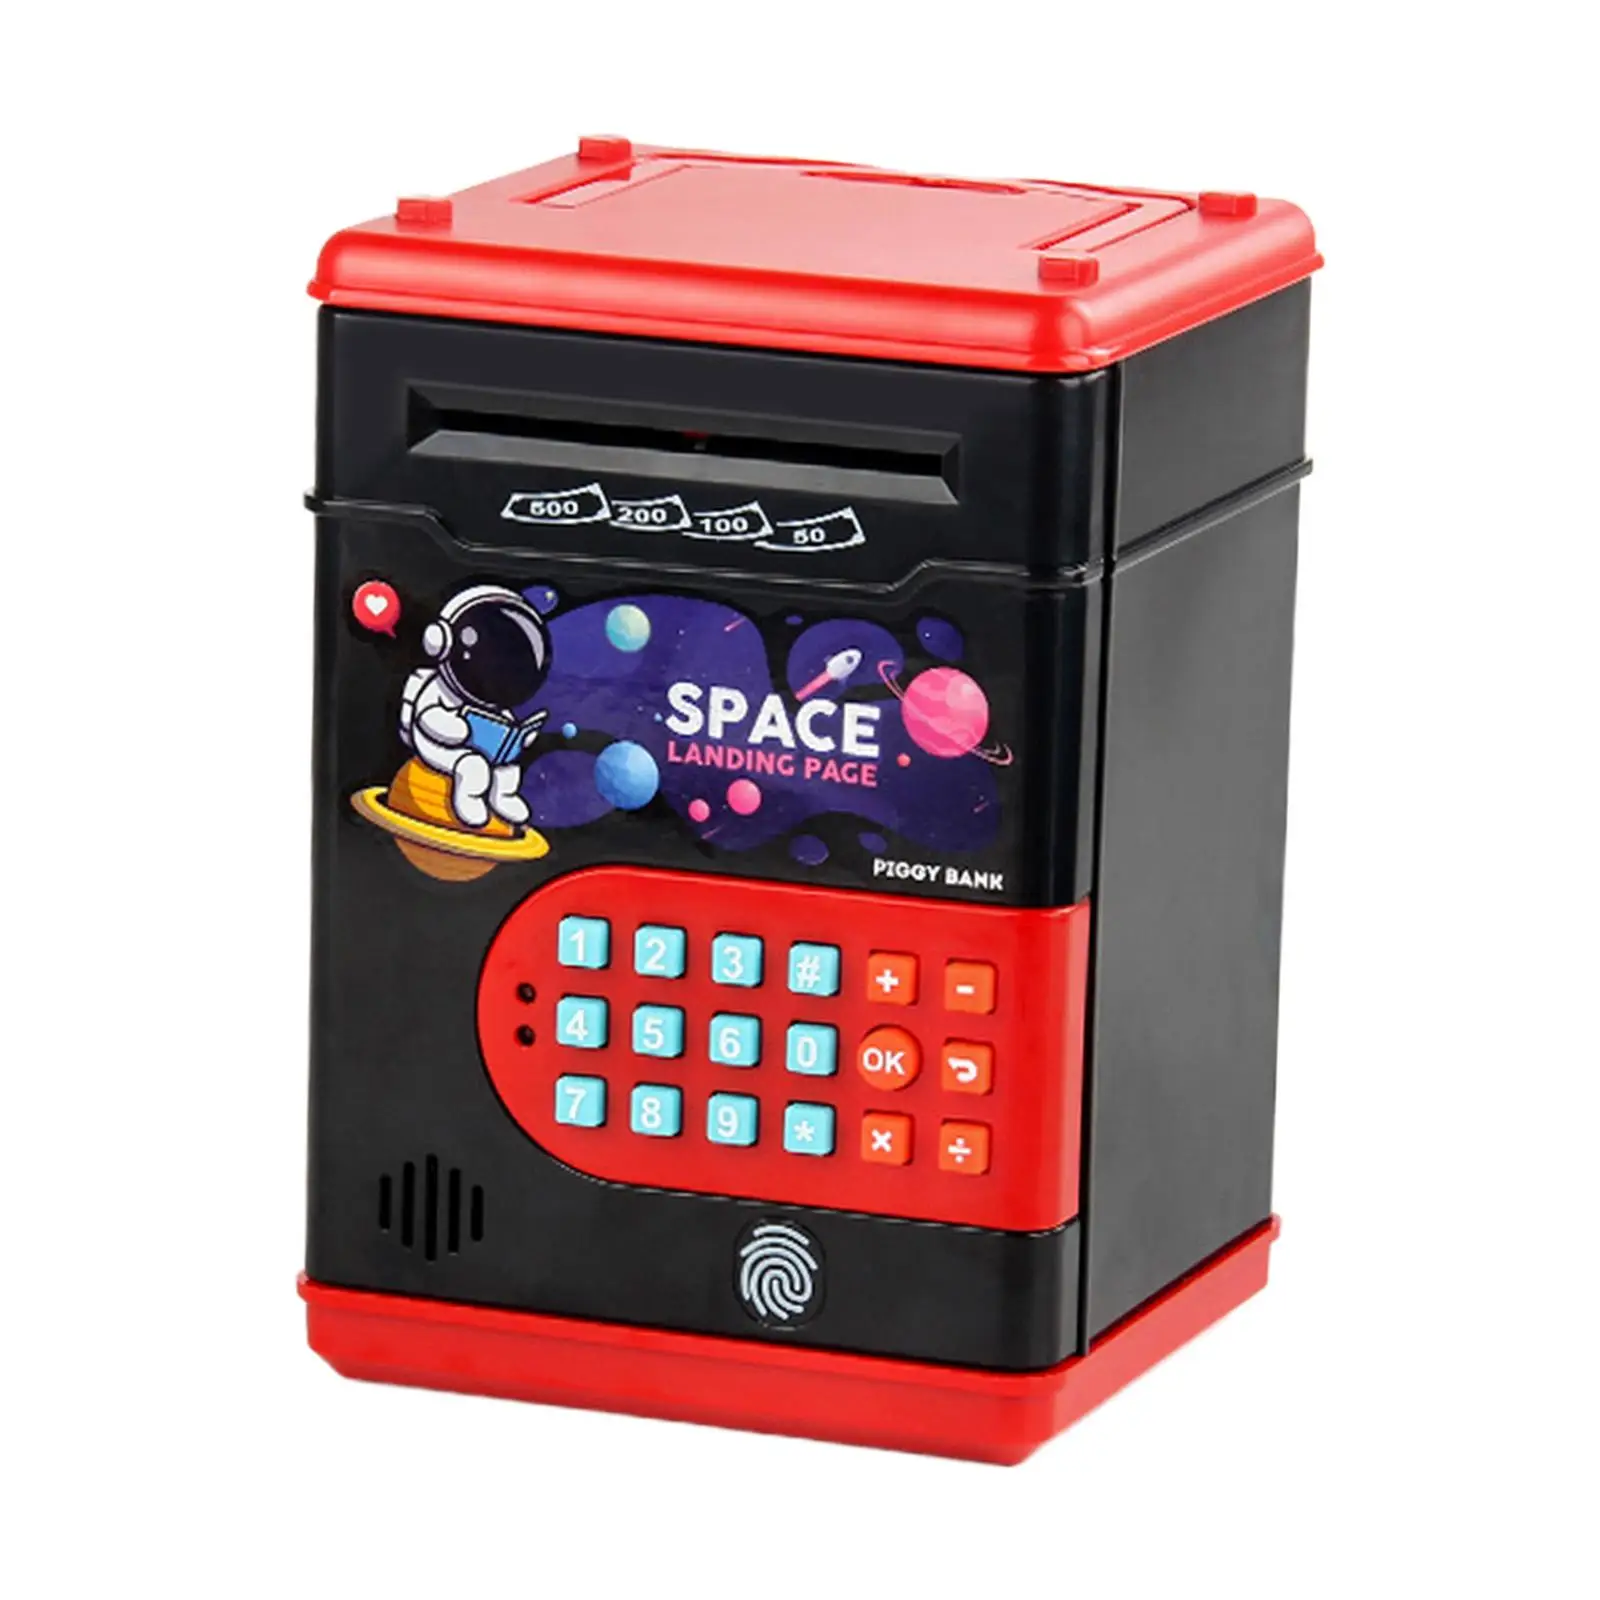 Large Capacity Password ATM Machine Toy Cash Coins Can Electronic Saving Bank for Kids Children Girls Boys Birthday Gifts